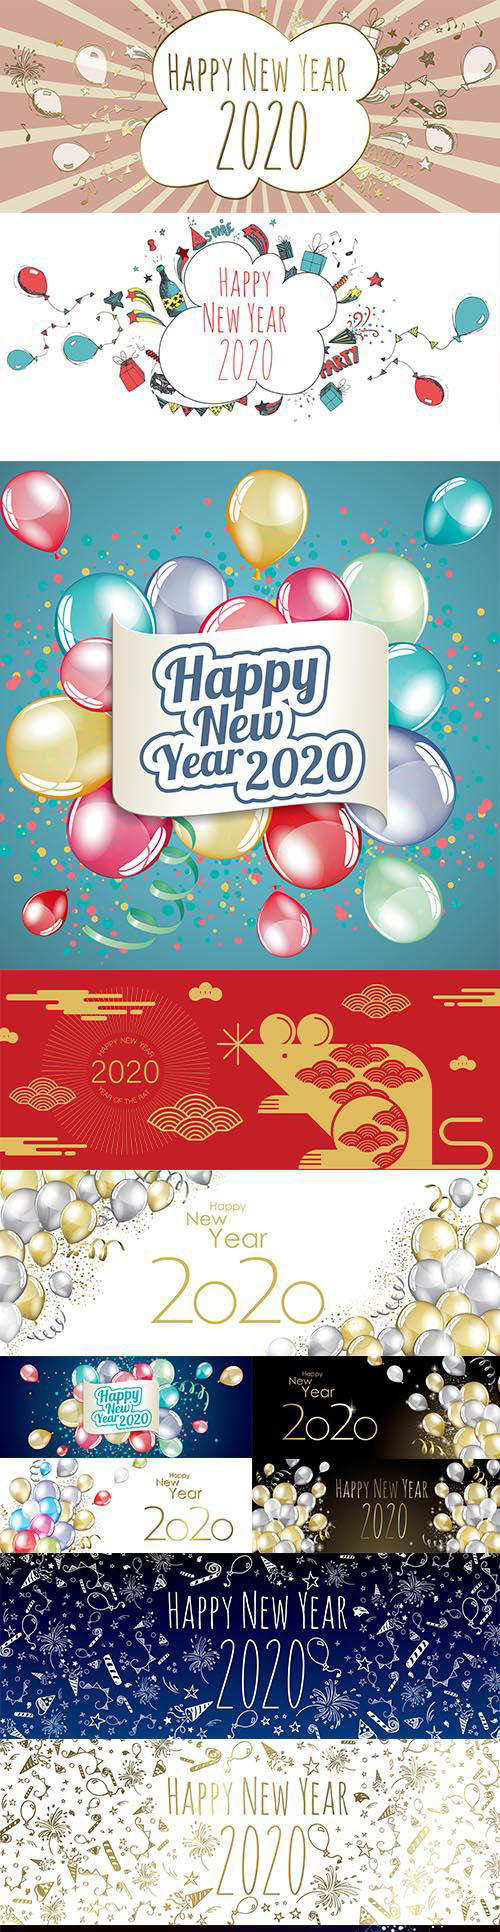 Merry Christmas and Happy New Year 2020 Illustrations Vector Set 3